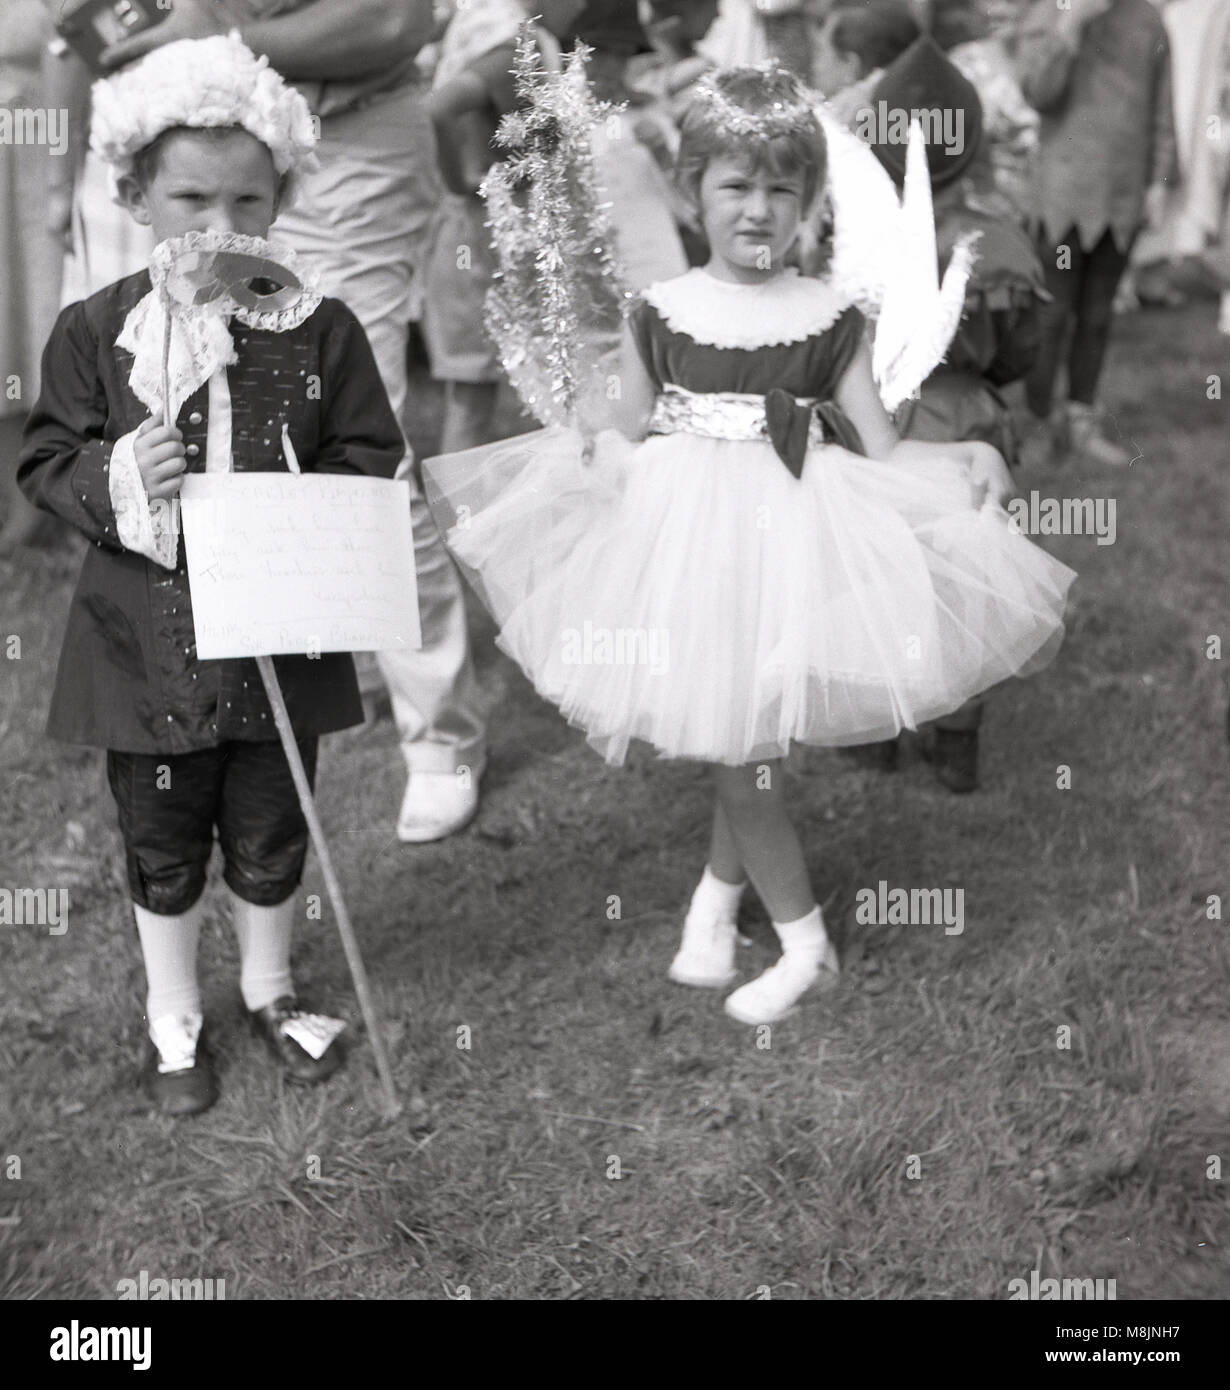 1950s, historical, two young children, a boy and girl taking part in a fancy dress competition at an outdoor fete stand together in their costumes, England, UK. Stock Photo